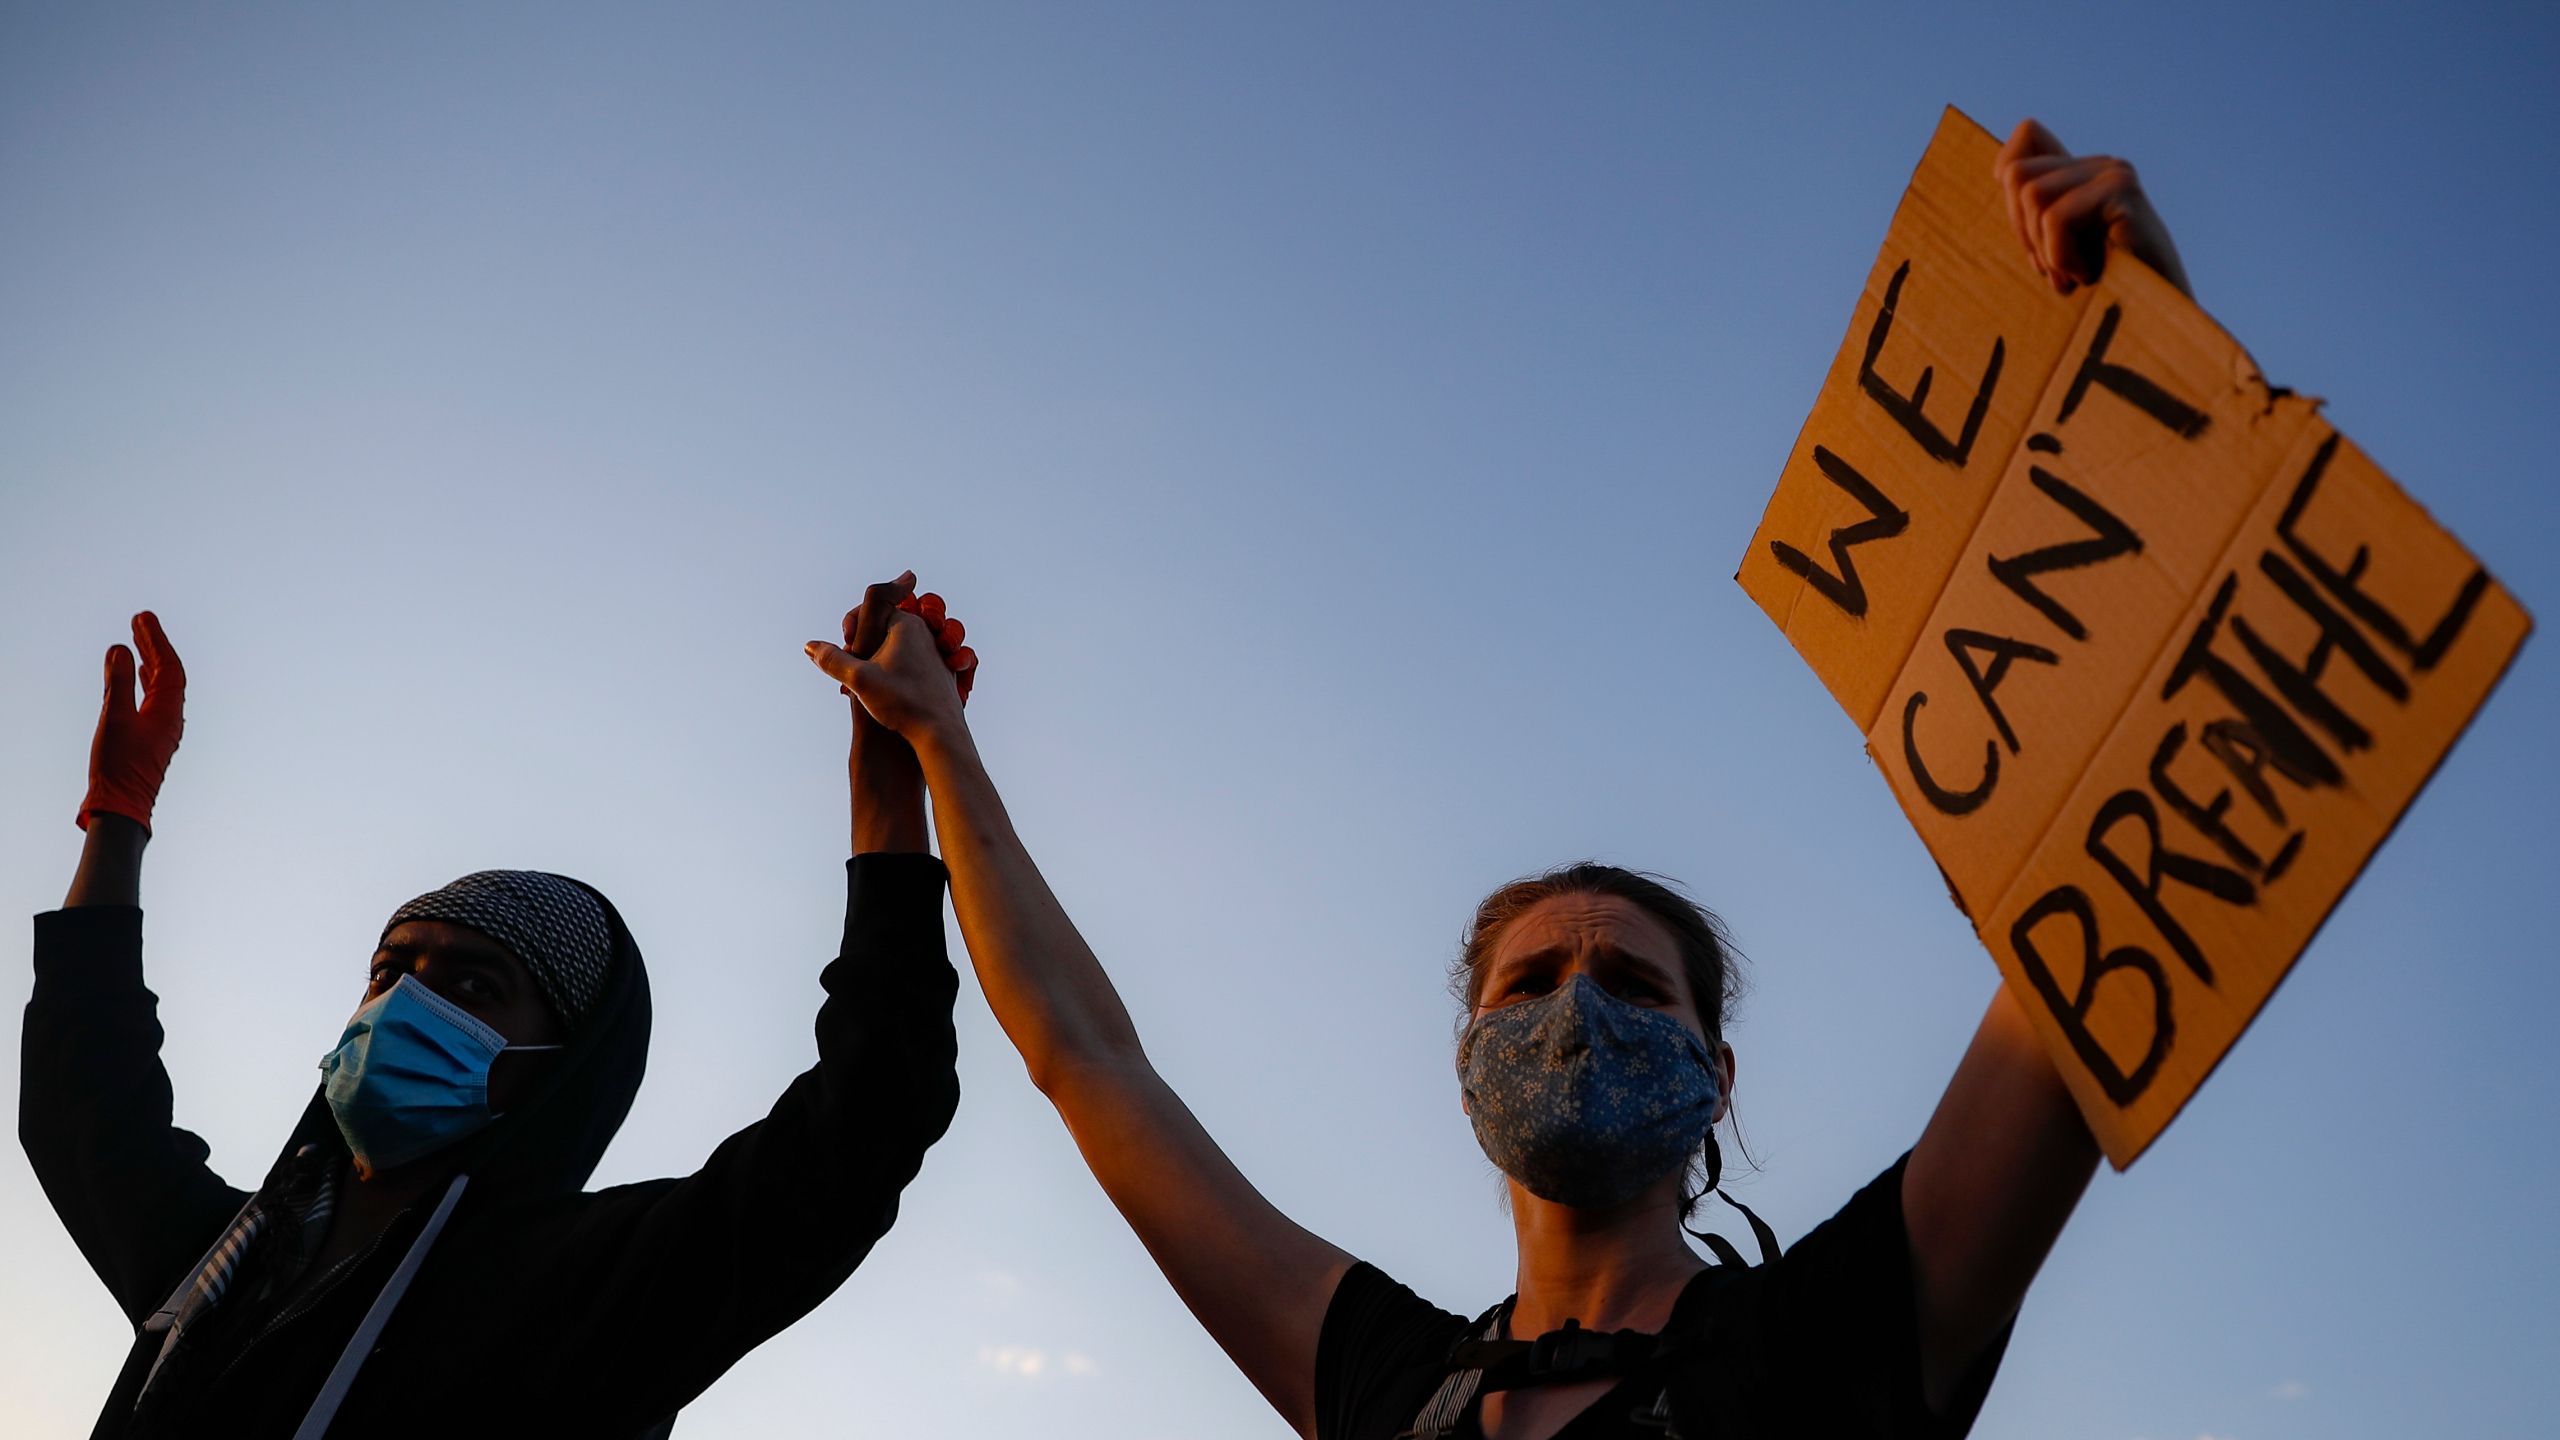 I can't breathe' a rally cry anew for police protests in US. WWTI